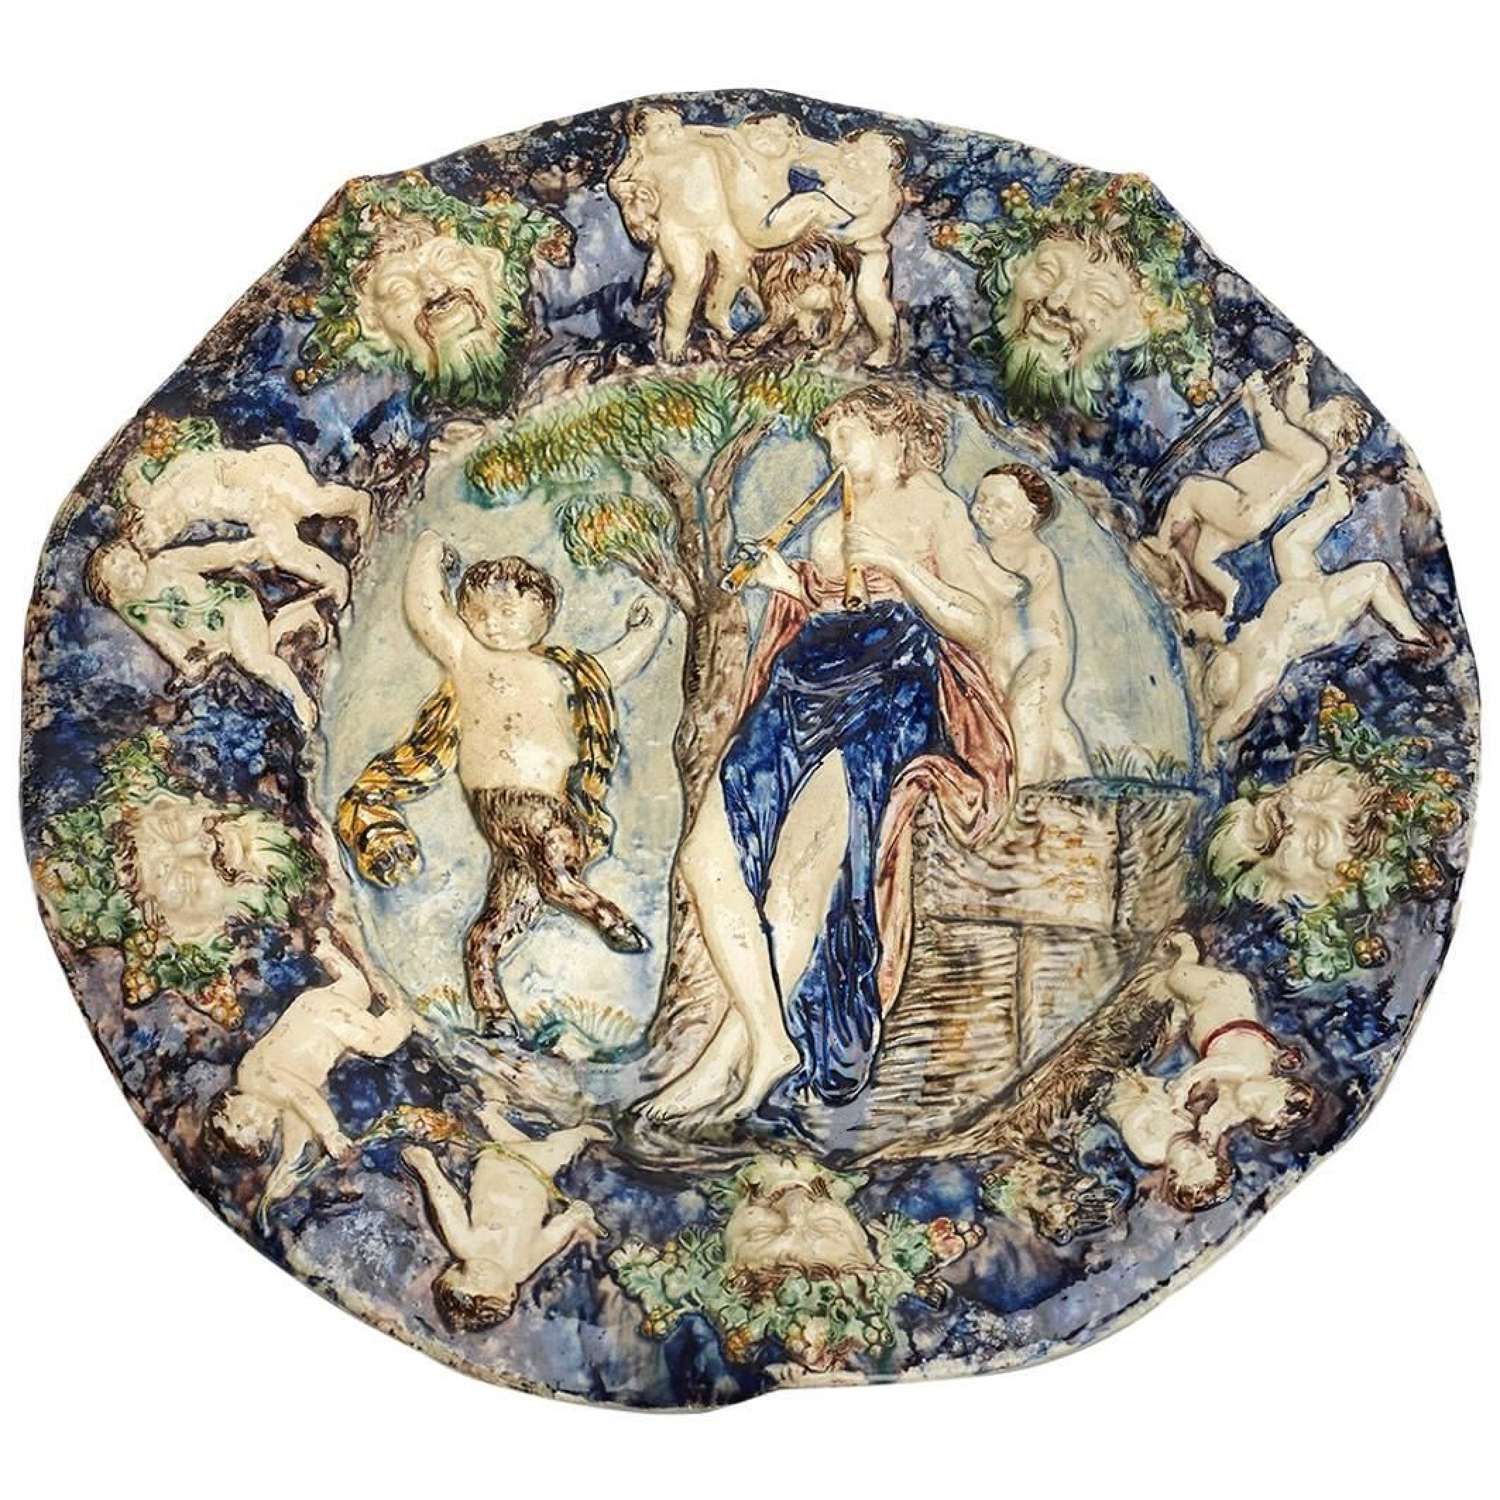 French Bernard Palissy Figural Majolica Plaque, 16th-17th Century